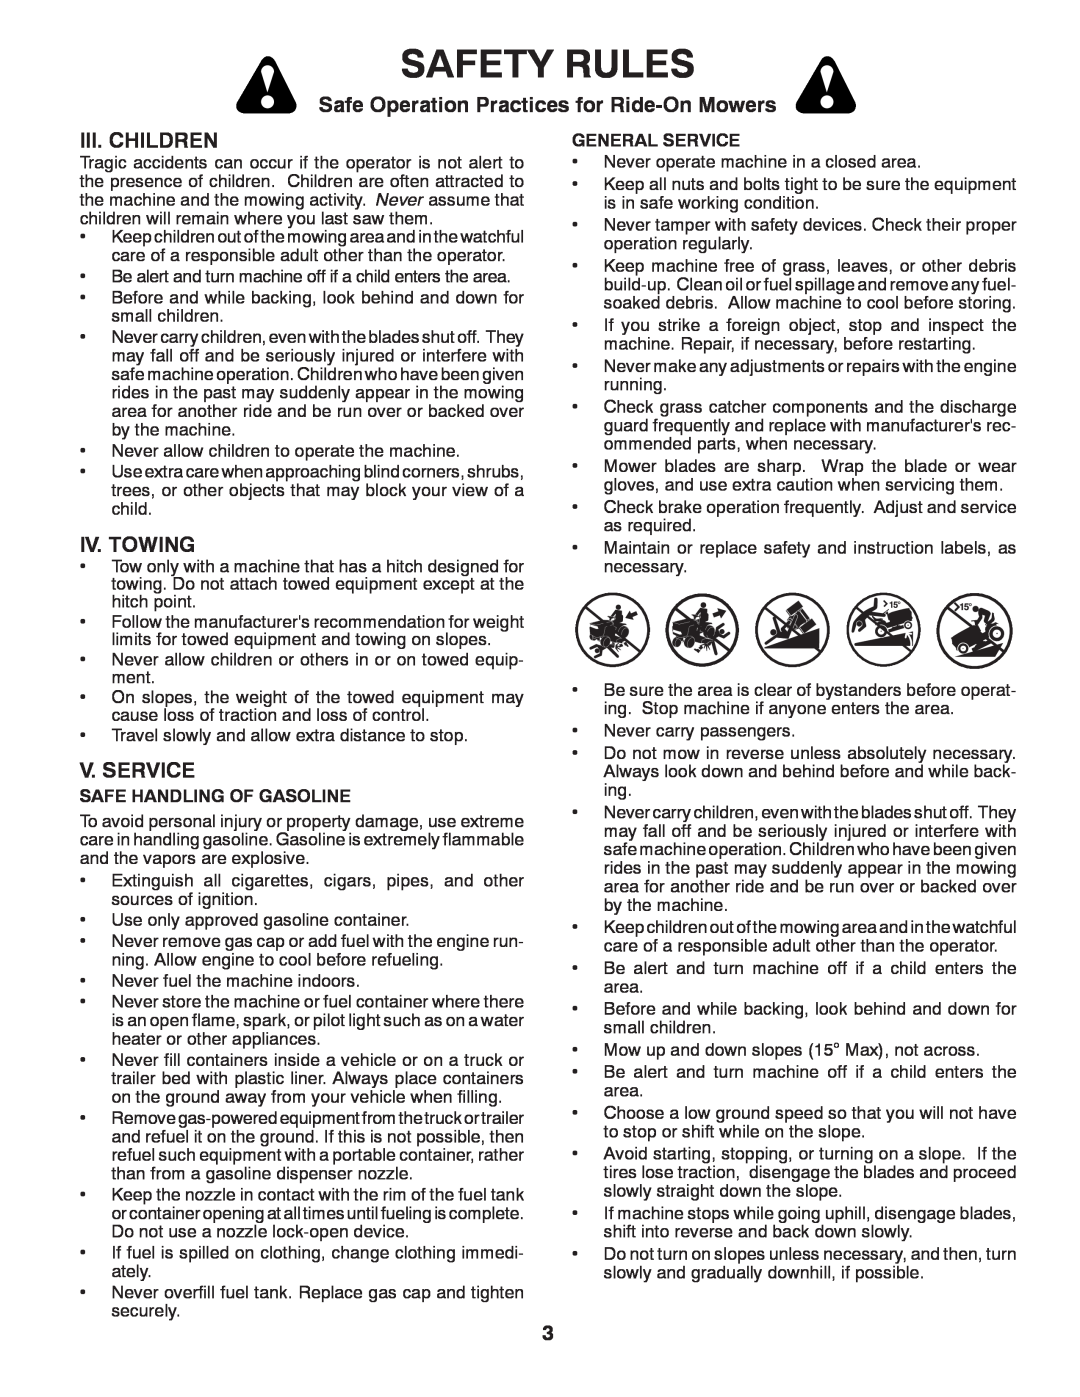 Poulan 532 40 36-87 manual Iii. Children, Iv. Towing, V. Service, Safety Rules, Safe Operation Practices for Ride-On Mowers 